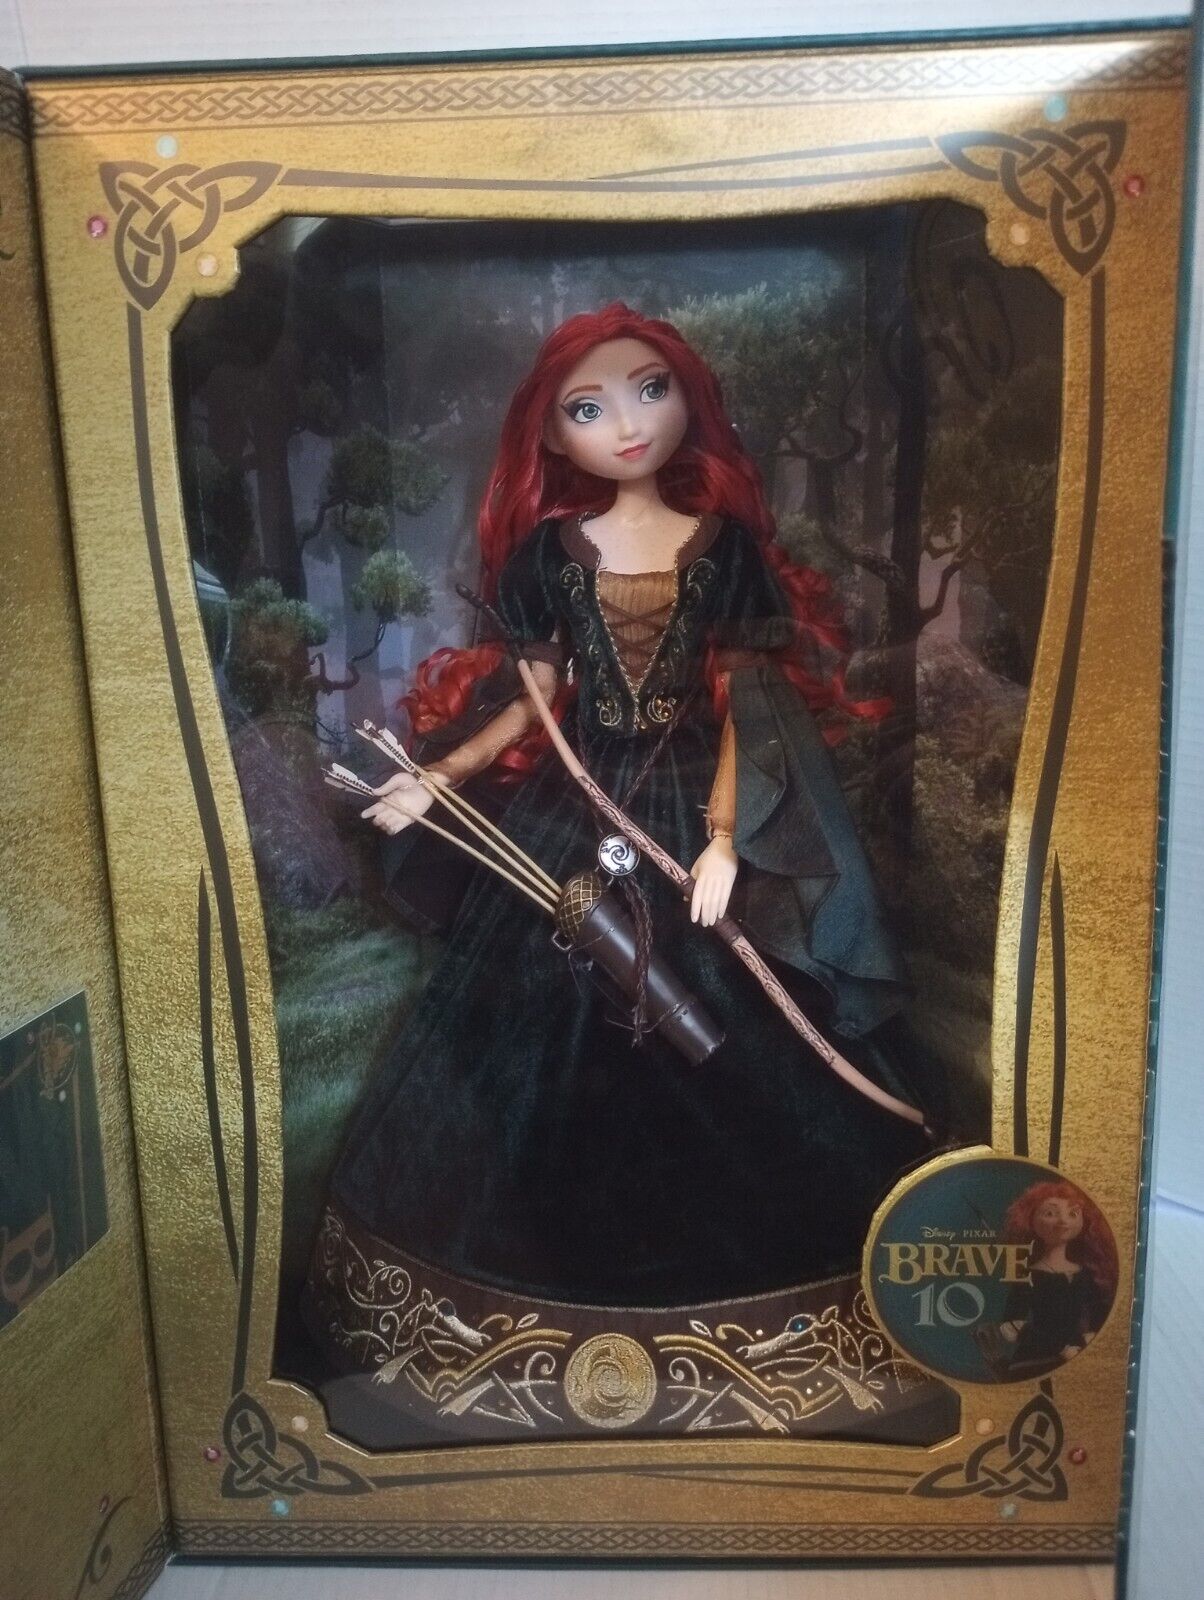 Merida Brave Disney Designer Collection 17” Doll Limited Edition New in Box